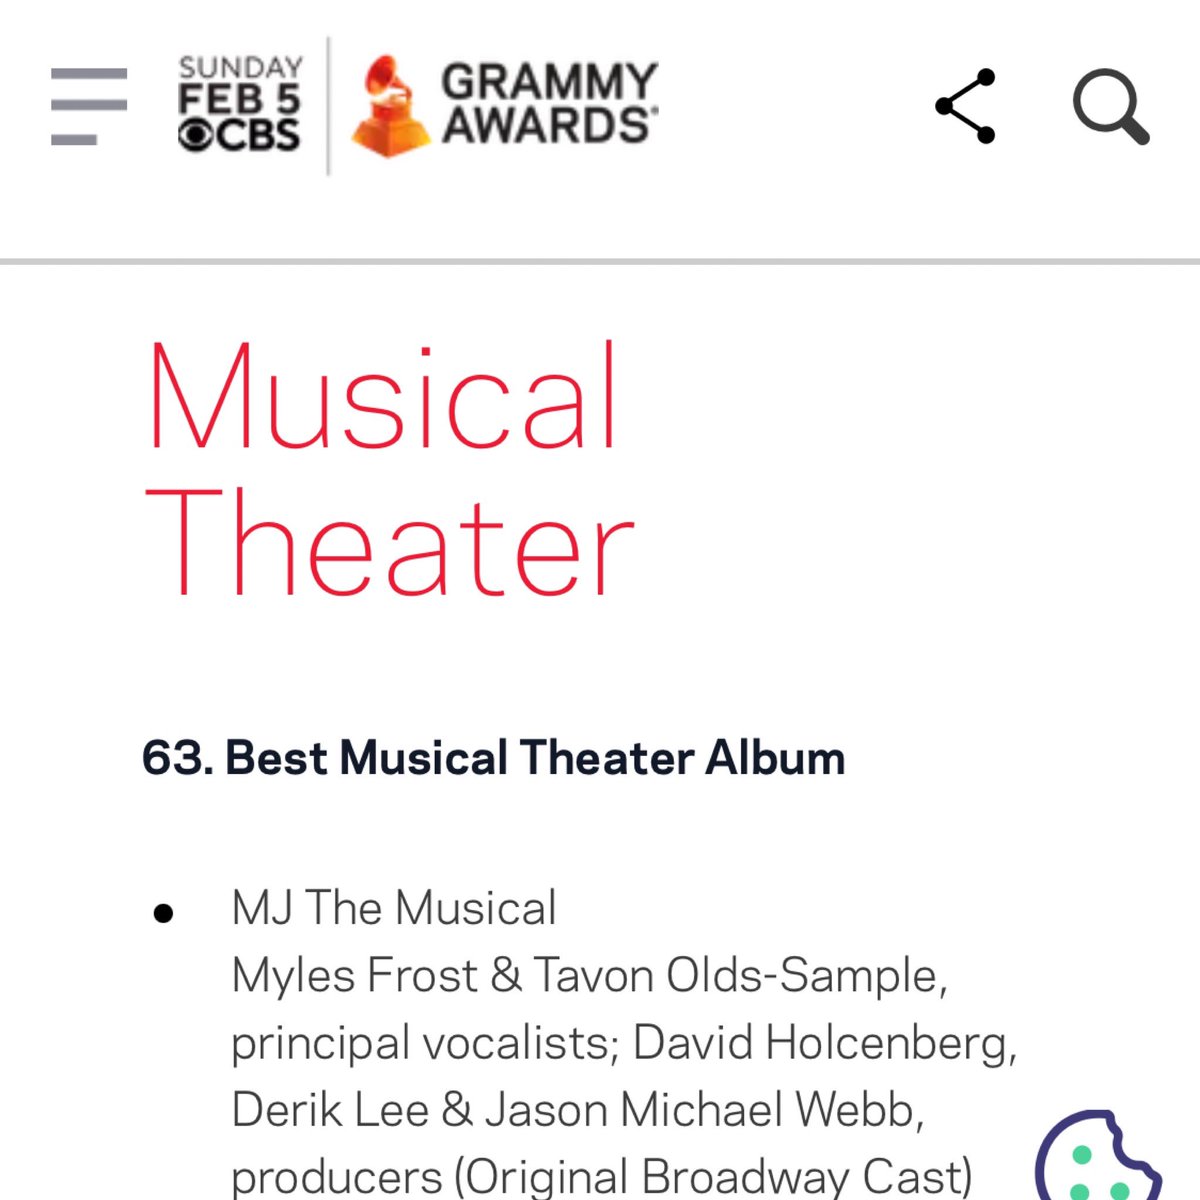 Thank you @RecordingAcad #Grammys   for having our #lawfirm at the ELI ceremony for entertainment lawyers ⚖️. Congratulations to all the nominees especially client Myles Frost for his Tony award winning #MichaelJackson role 😎. #blacklawyers #lawtwitter #blacklawtwitter #lawyer